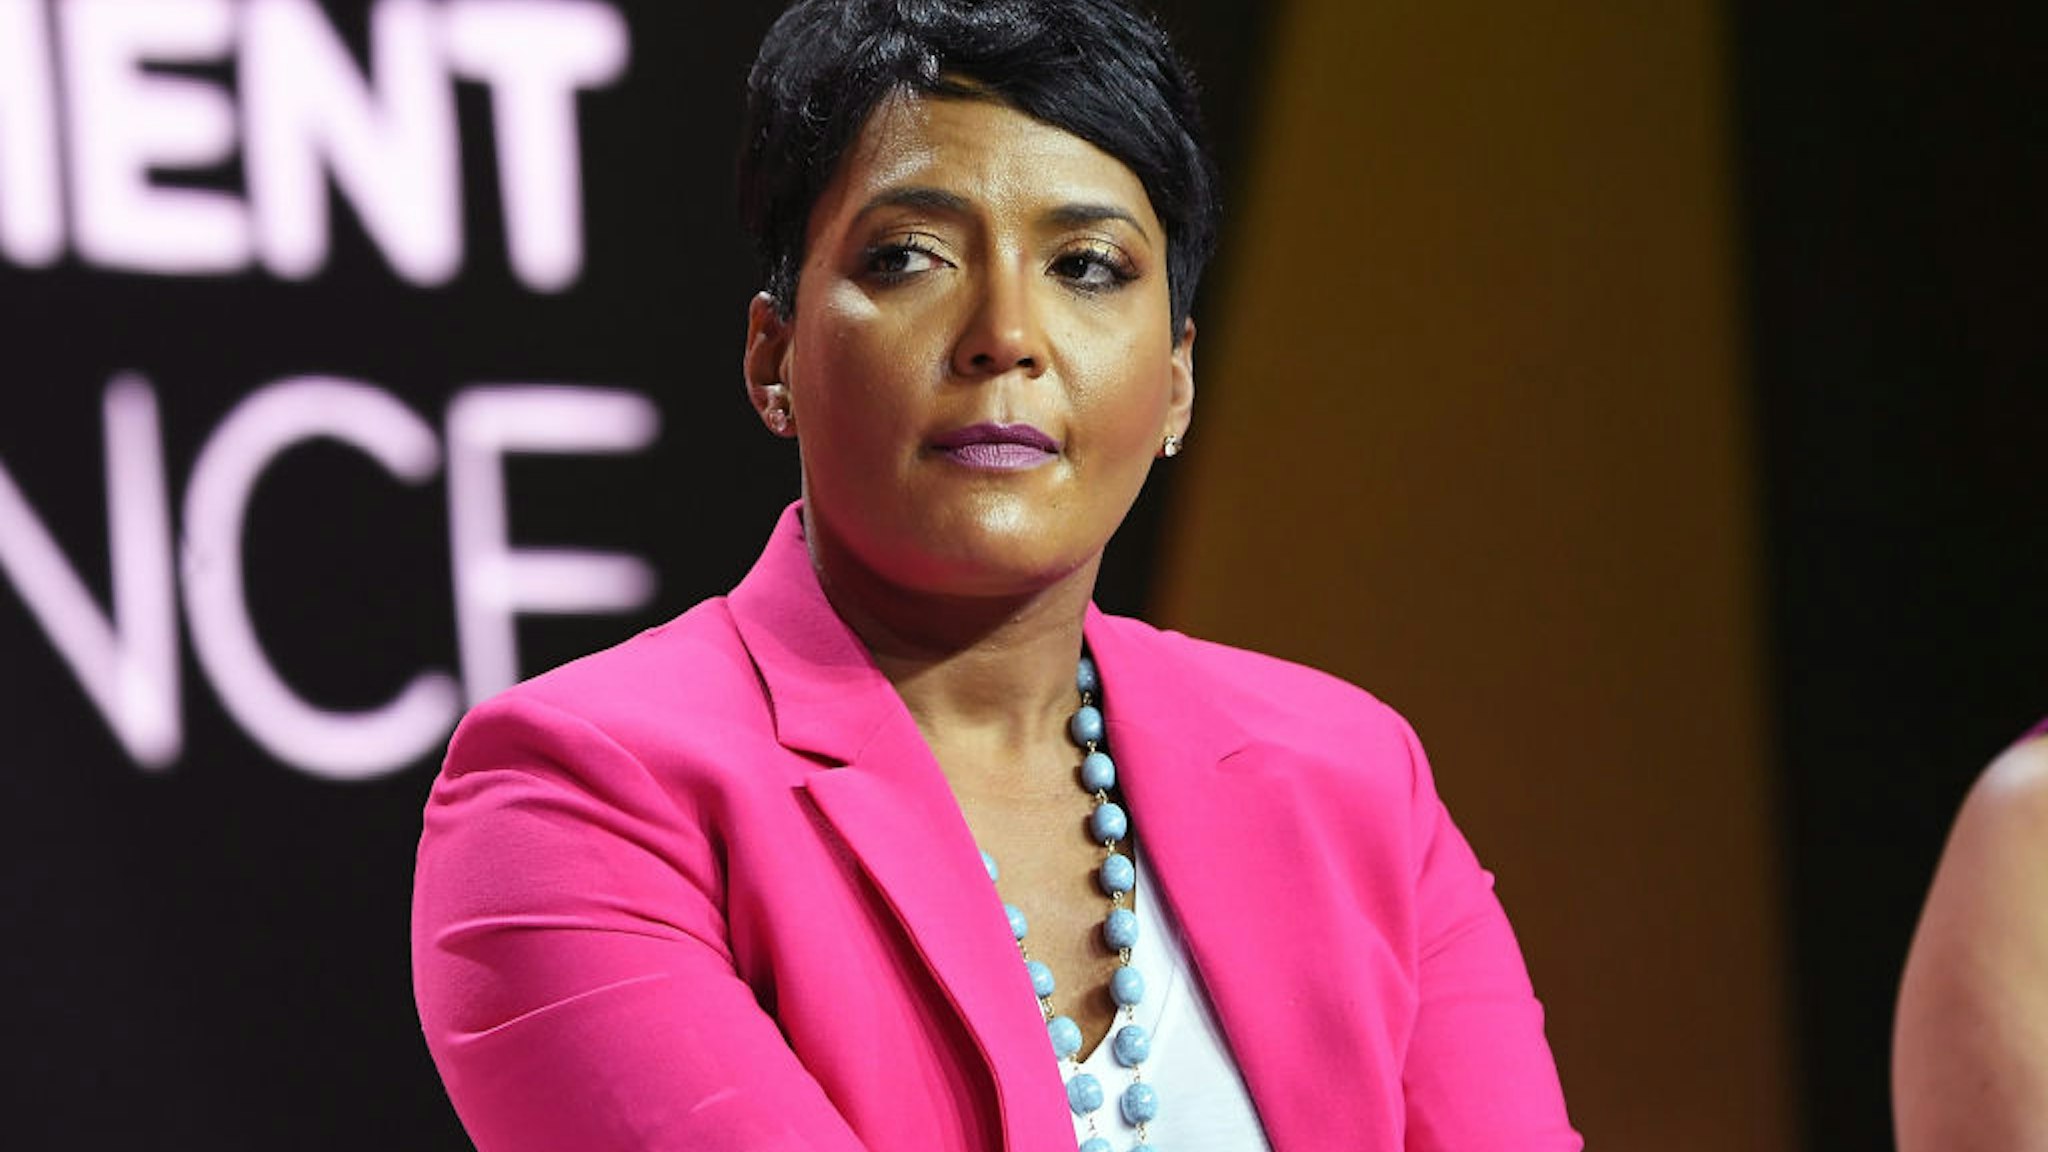 NEW ORLEANS, LA - JULY 07: Mayor of Atlanta Keisha Lance Bottoms speaks onstage during the 2018 Essence Festival presented by Coca-Cola at Ernest N. Morial Convention Center on July 7, 2018 in New Orleans, Louisiana. (Photo by Paras Griffin/Getty Images for Essence)